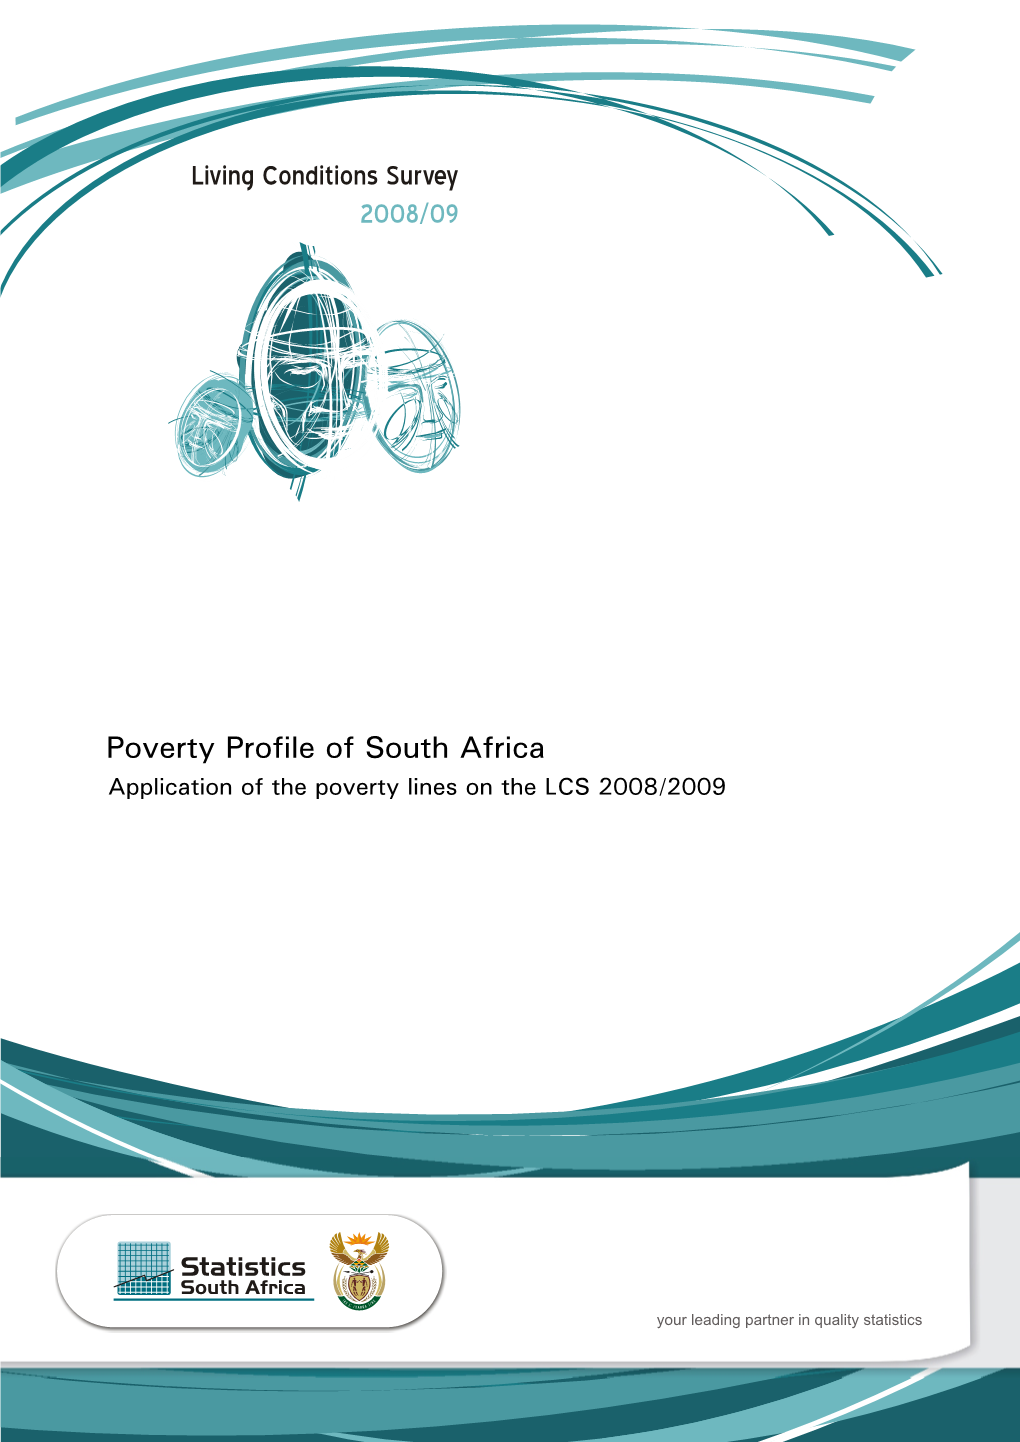 Poverty Profile of South Africa Application of the Poverty Lines on the LCS 2008/2009